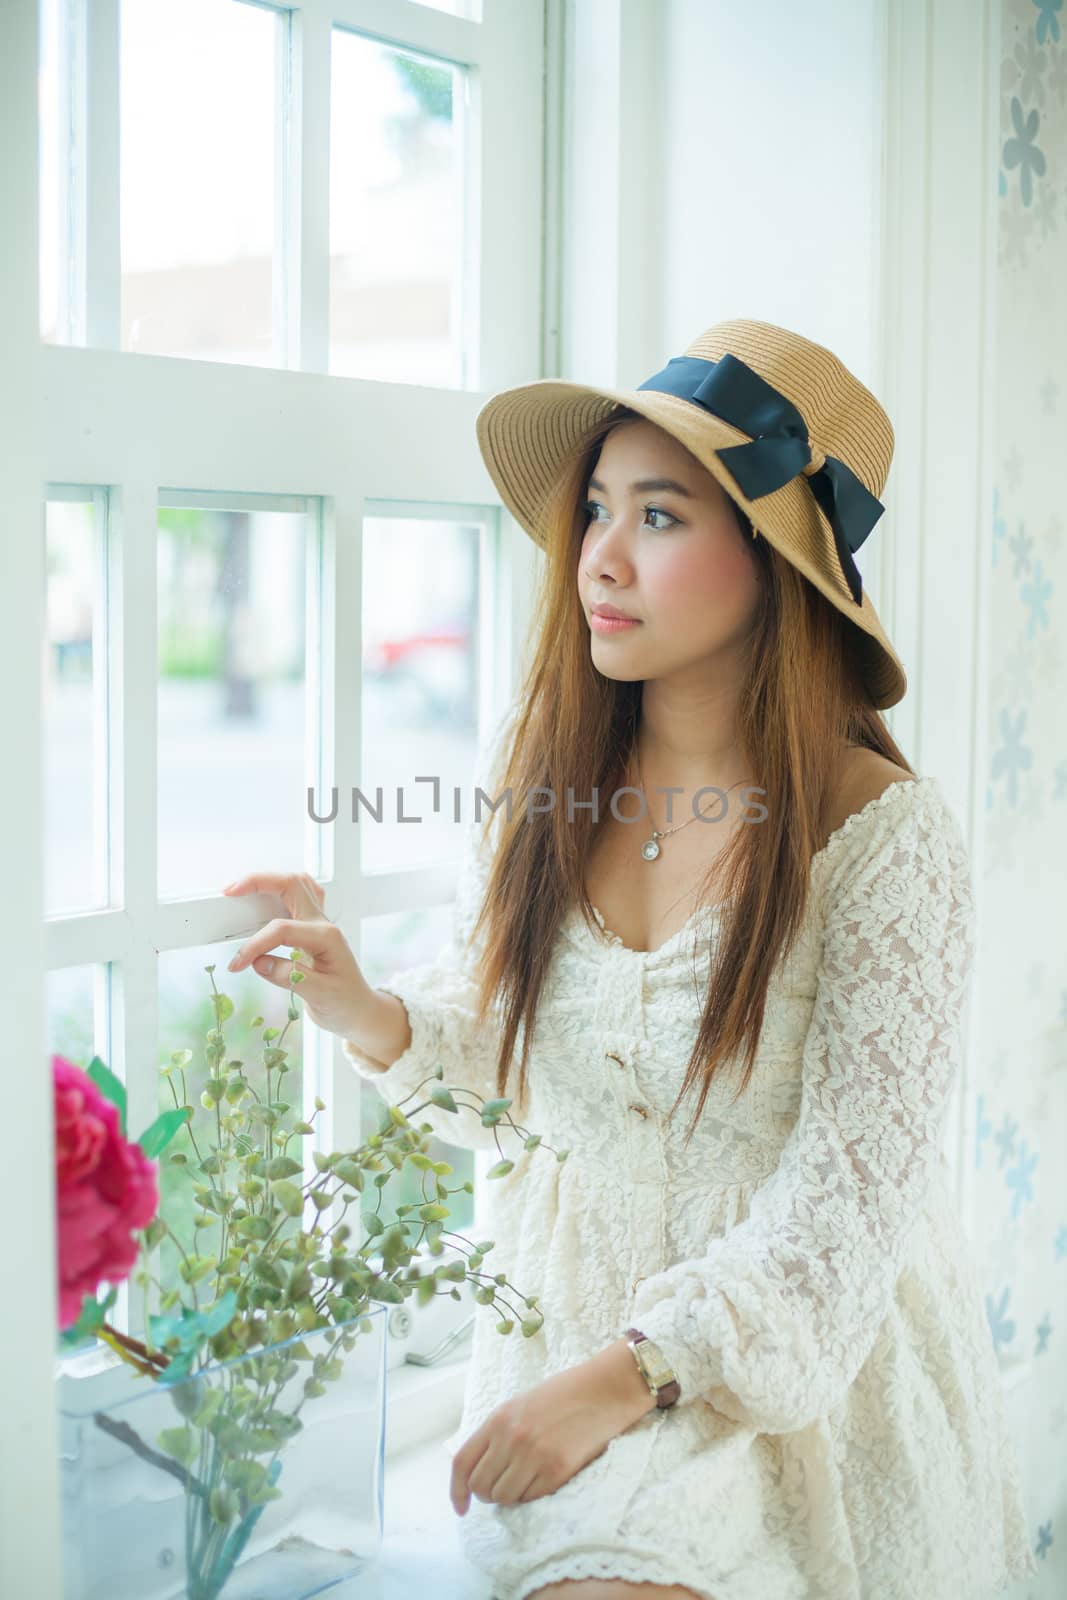 Sad asian vintage woman on the window looking out the window